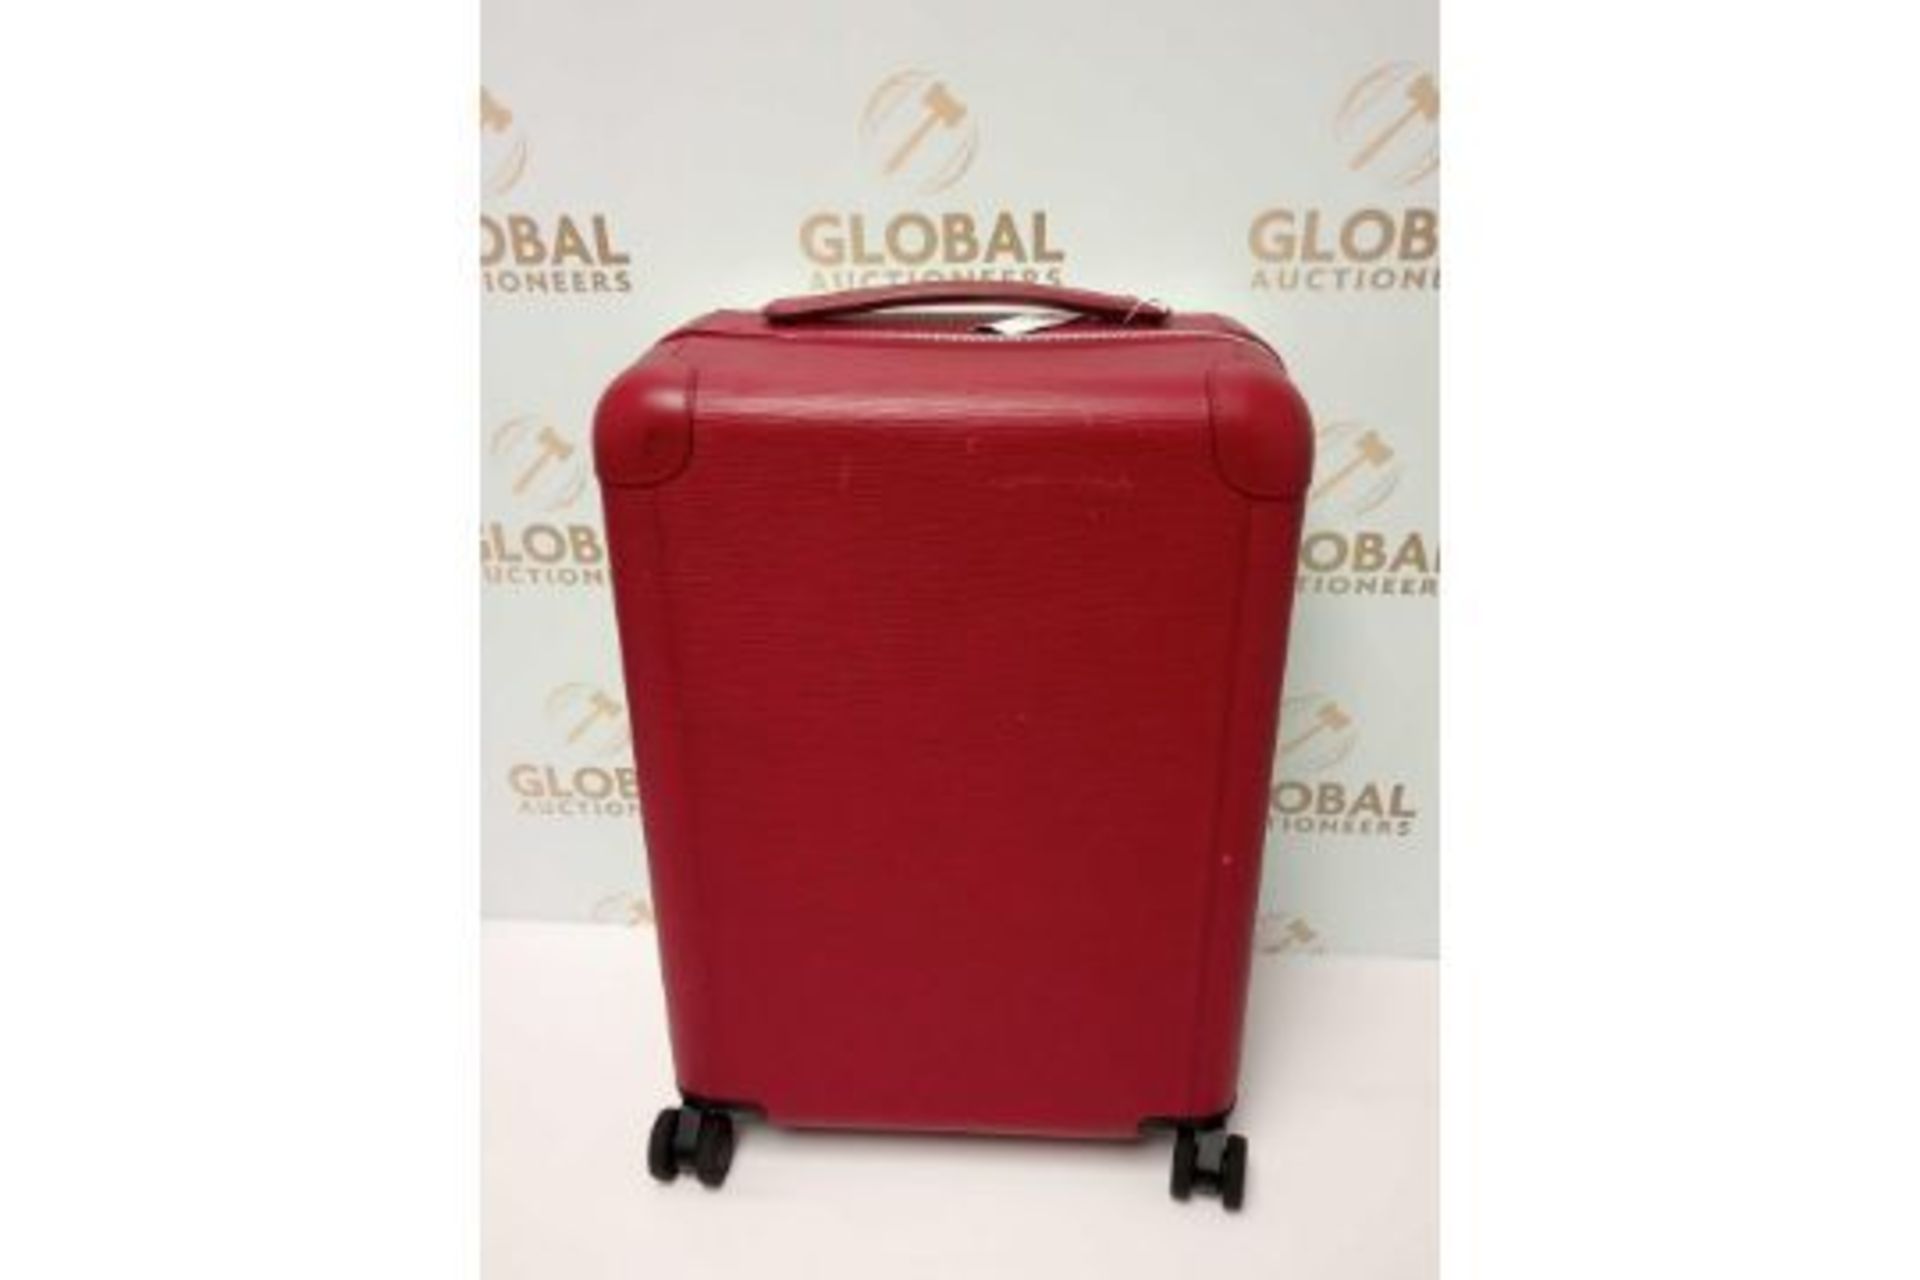 RRP £2300 Louis Vuitton Horizon Burgundy Leather Suitcase AAN1711, Grade A (Condition Reports